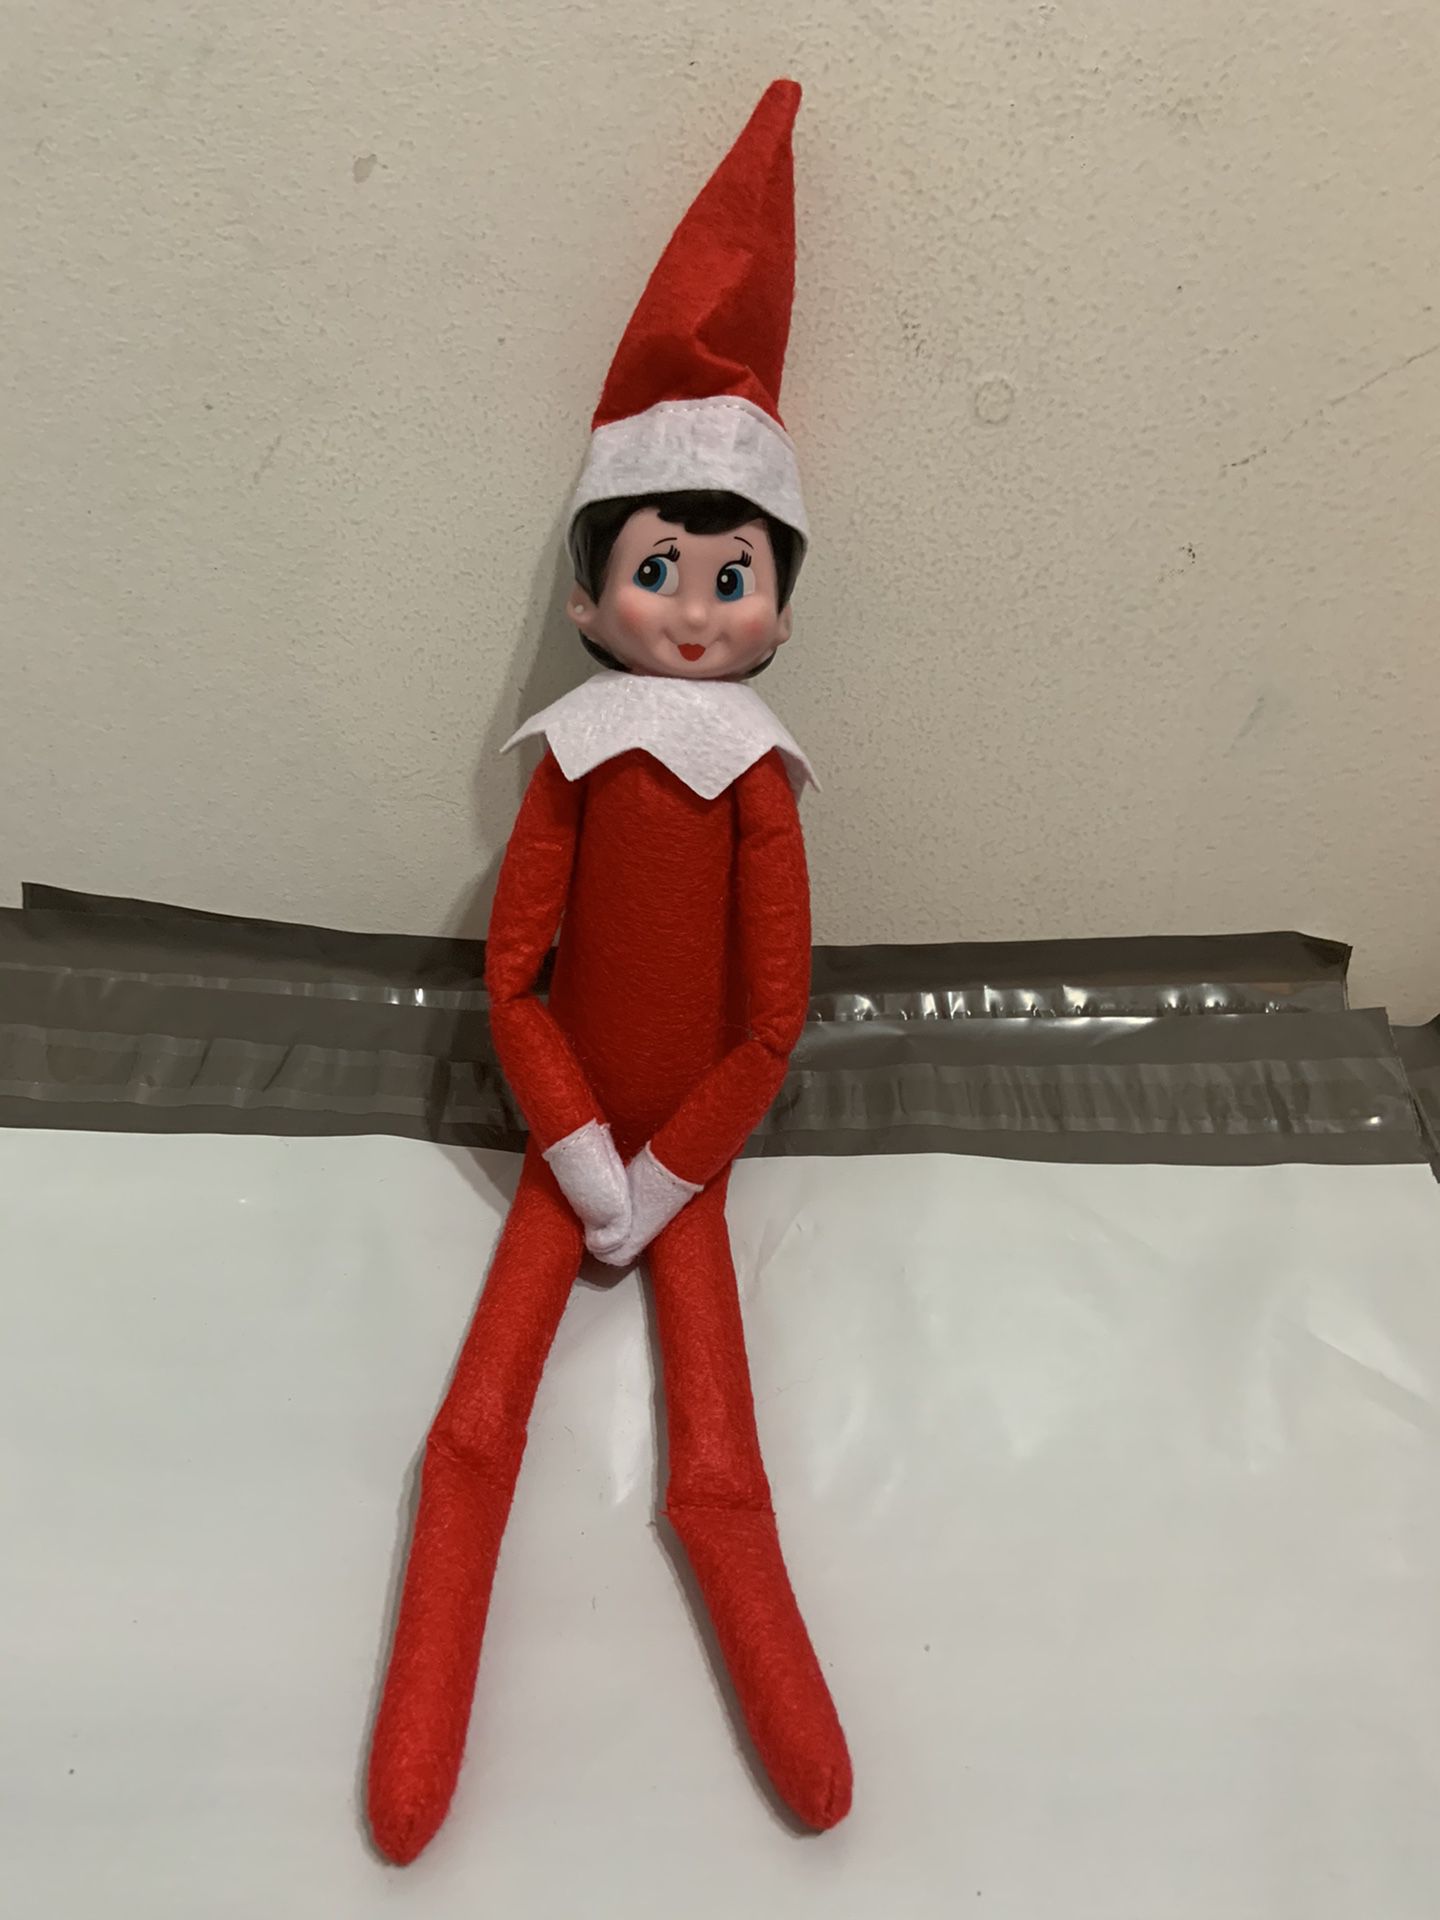 New Elf on the shelf Red Girl Plush Doll Toy High Quality Great Gift